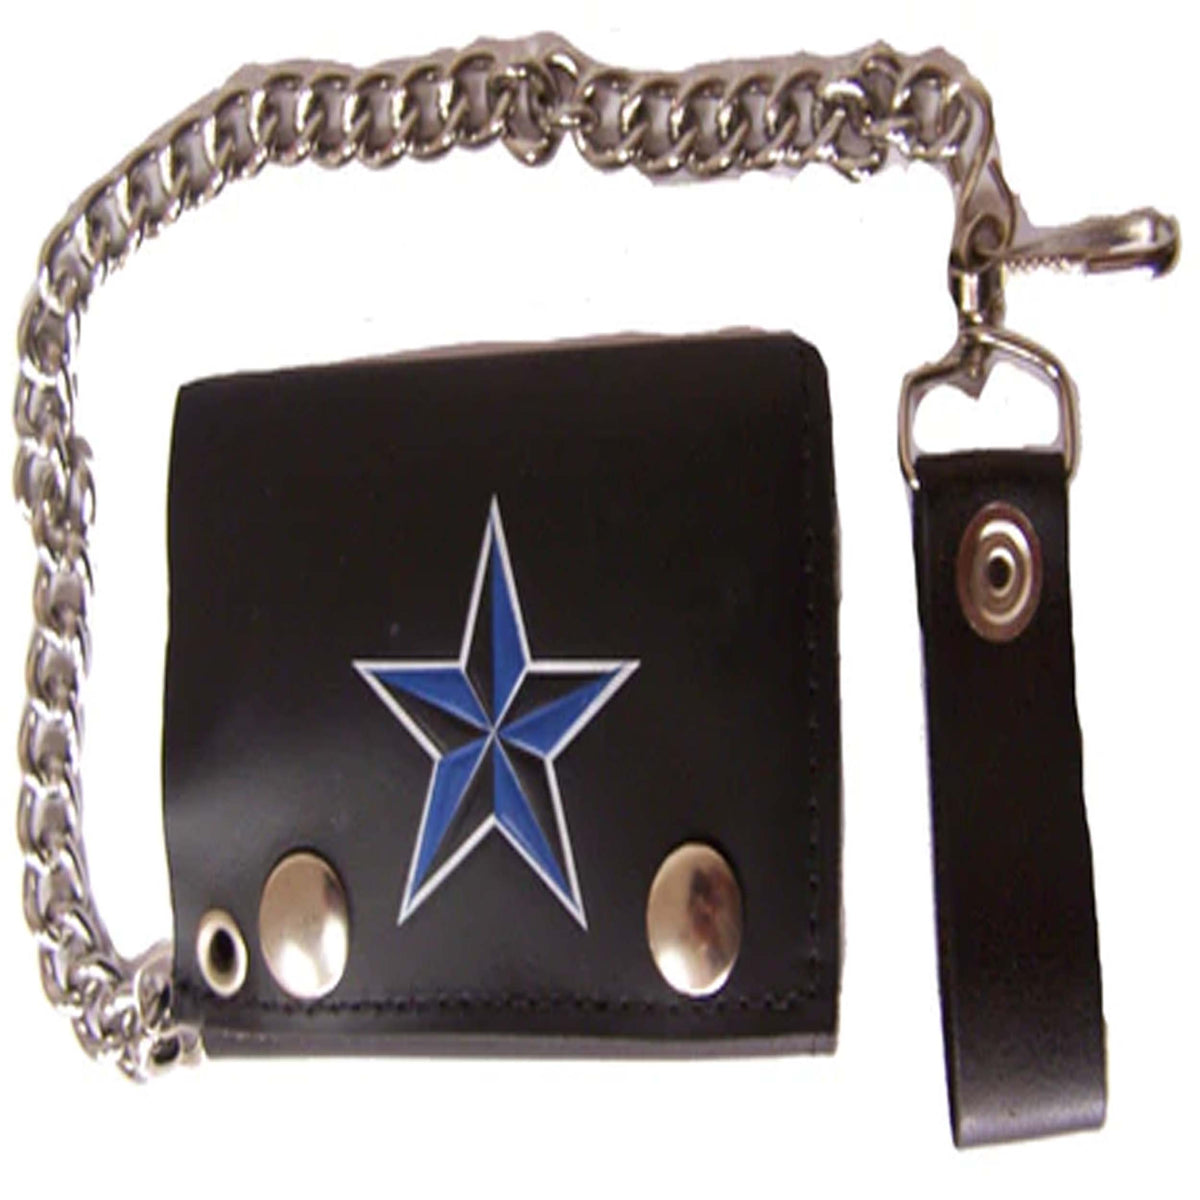 Wholesale BLUE NAUTICAL STAR TRIFOLD LEATHER WALLETS WITH CHAIN (Sold by the piece)